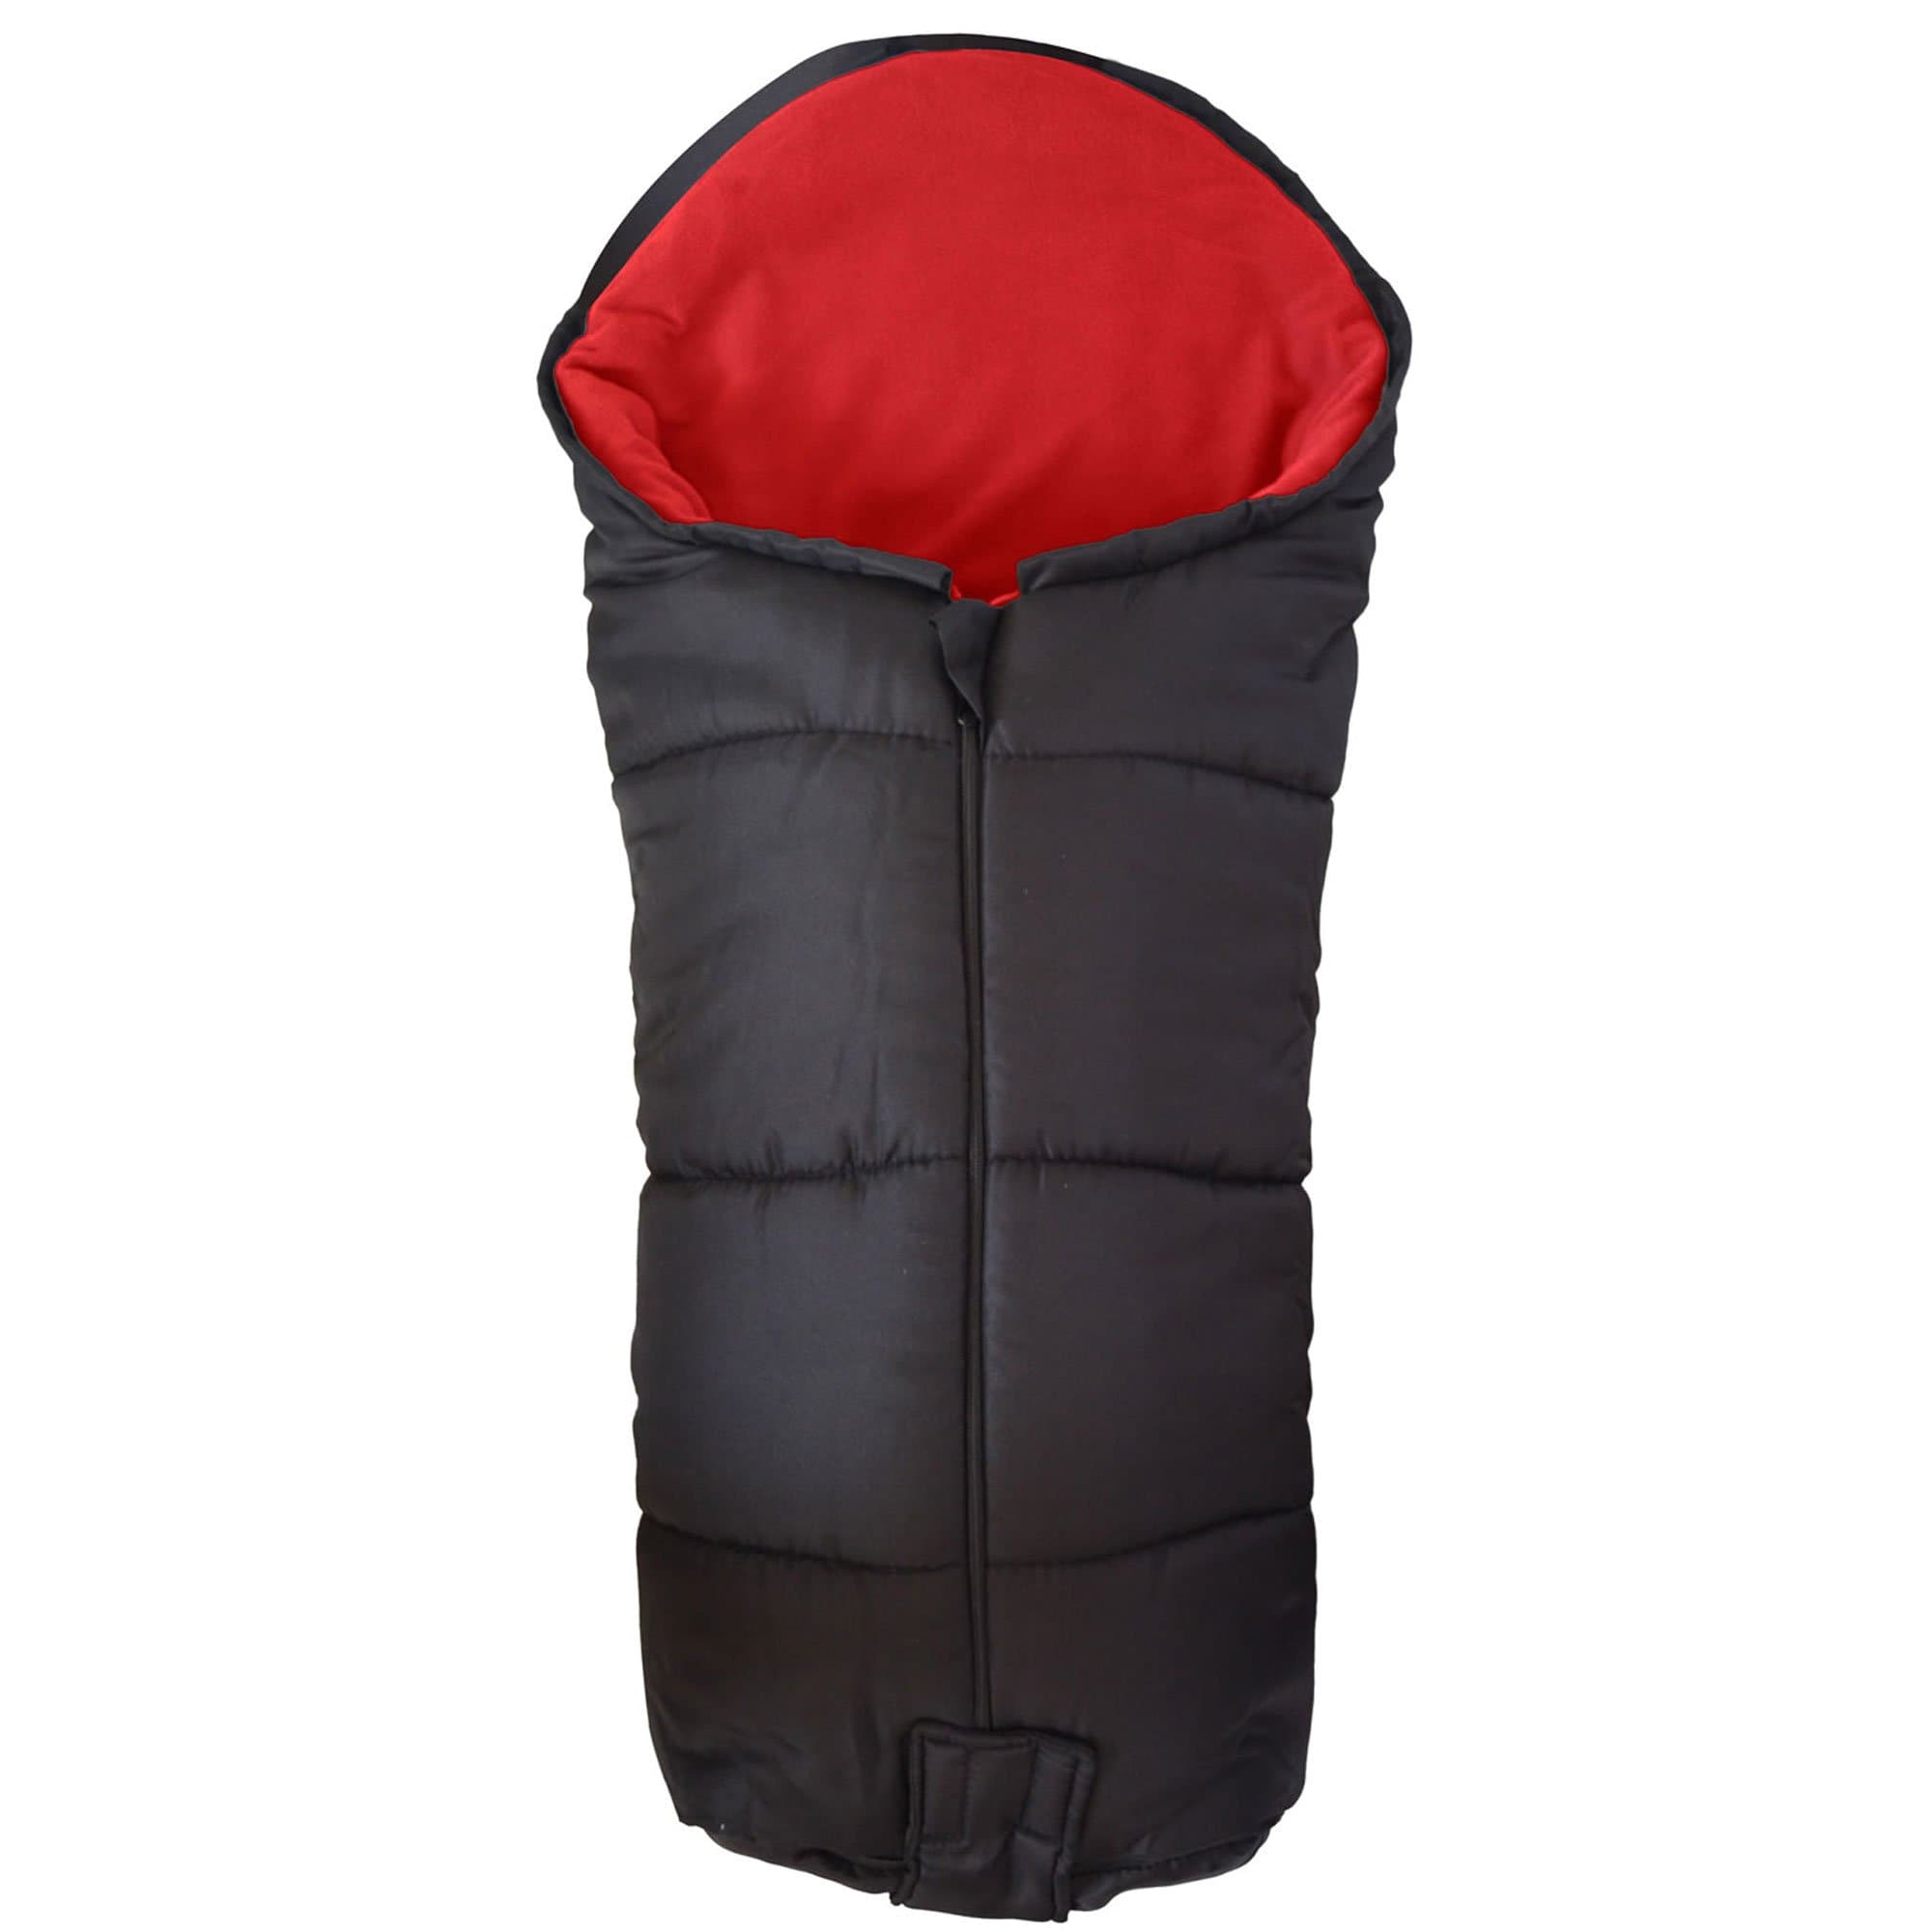 Deluxe Footmuff / Cosy Toes Compatible with Easywalker - Red / Fits All Models | For Your Little One